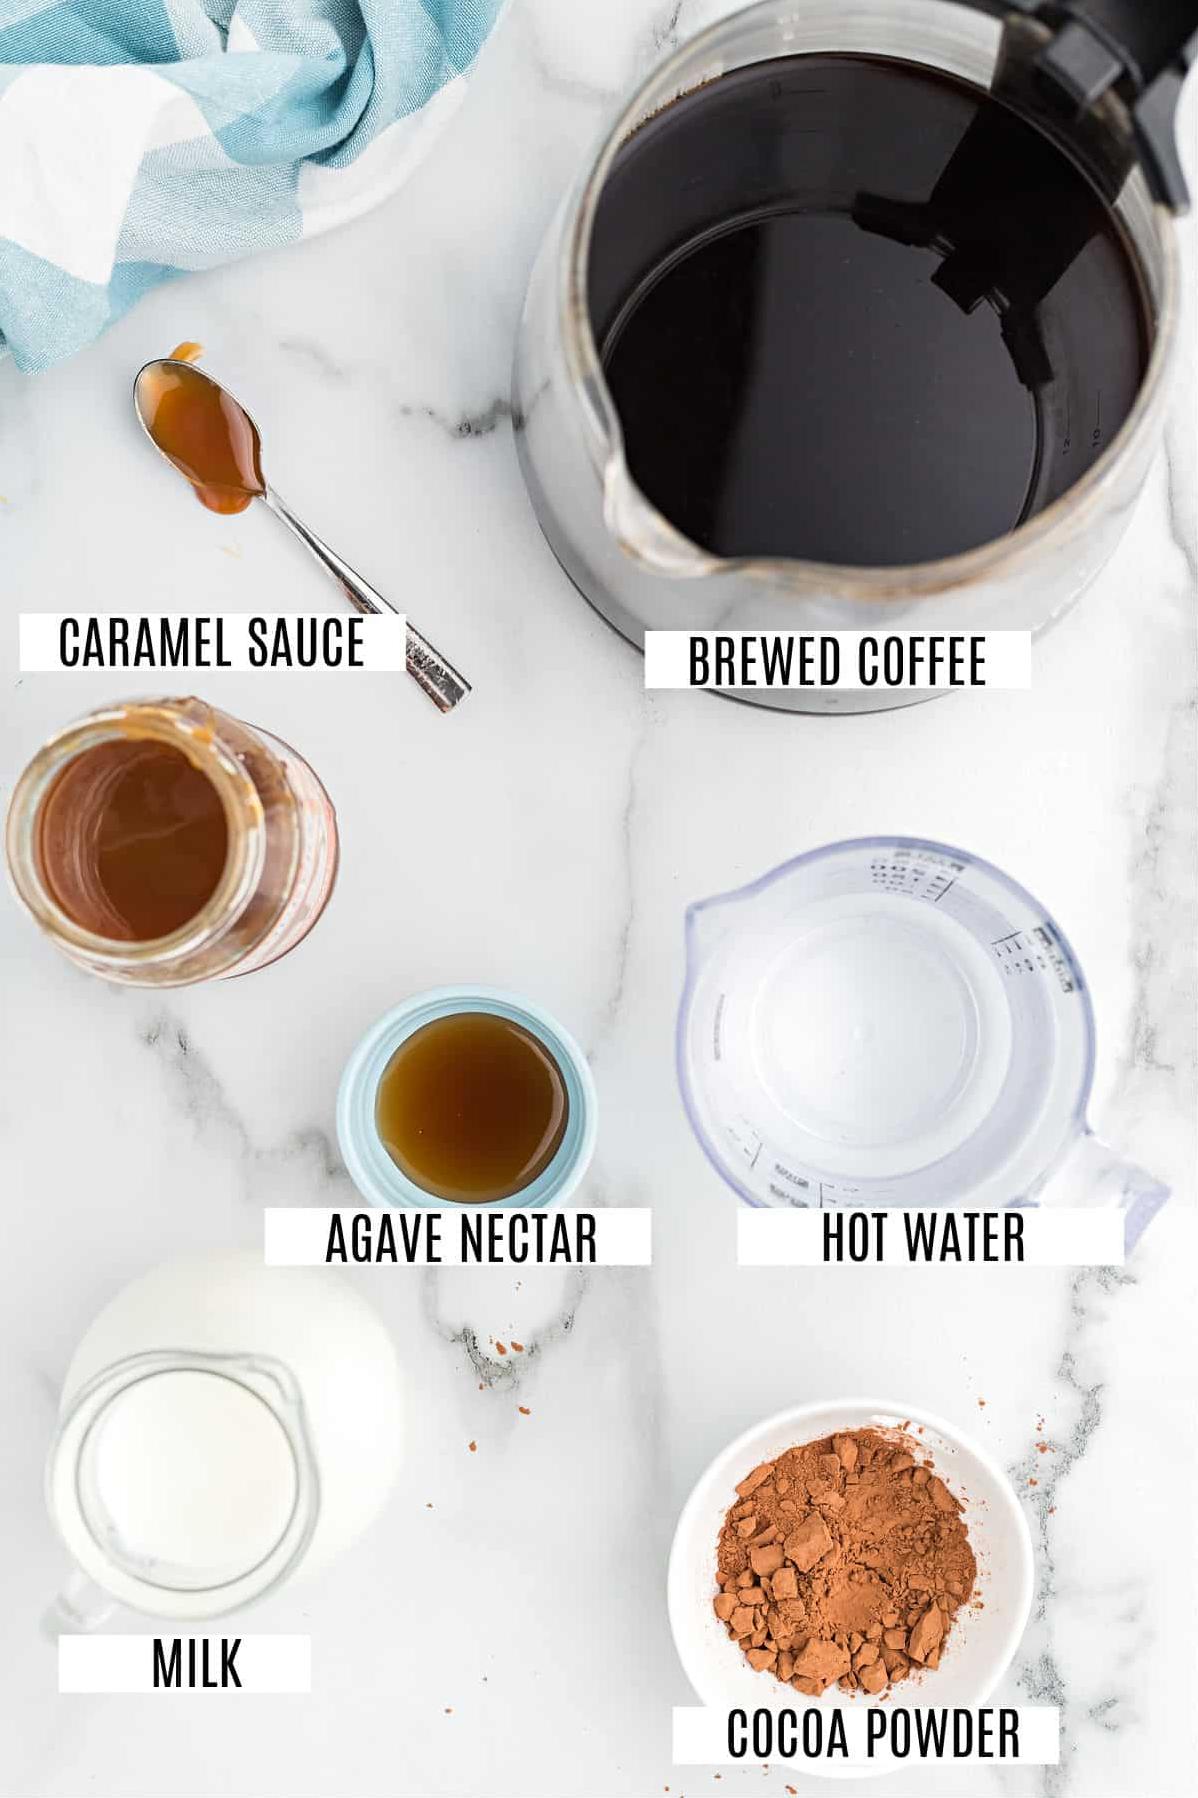  Give your pancakes or waffles an extra boost of flavor by topping them with this delicious mocha caramel sauce.